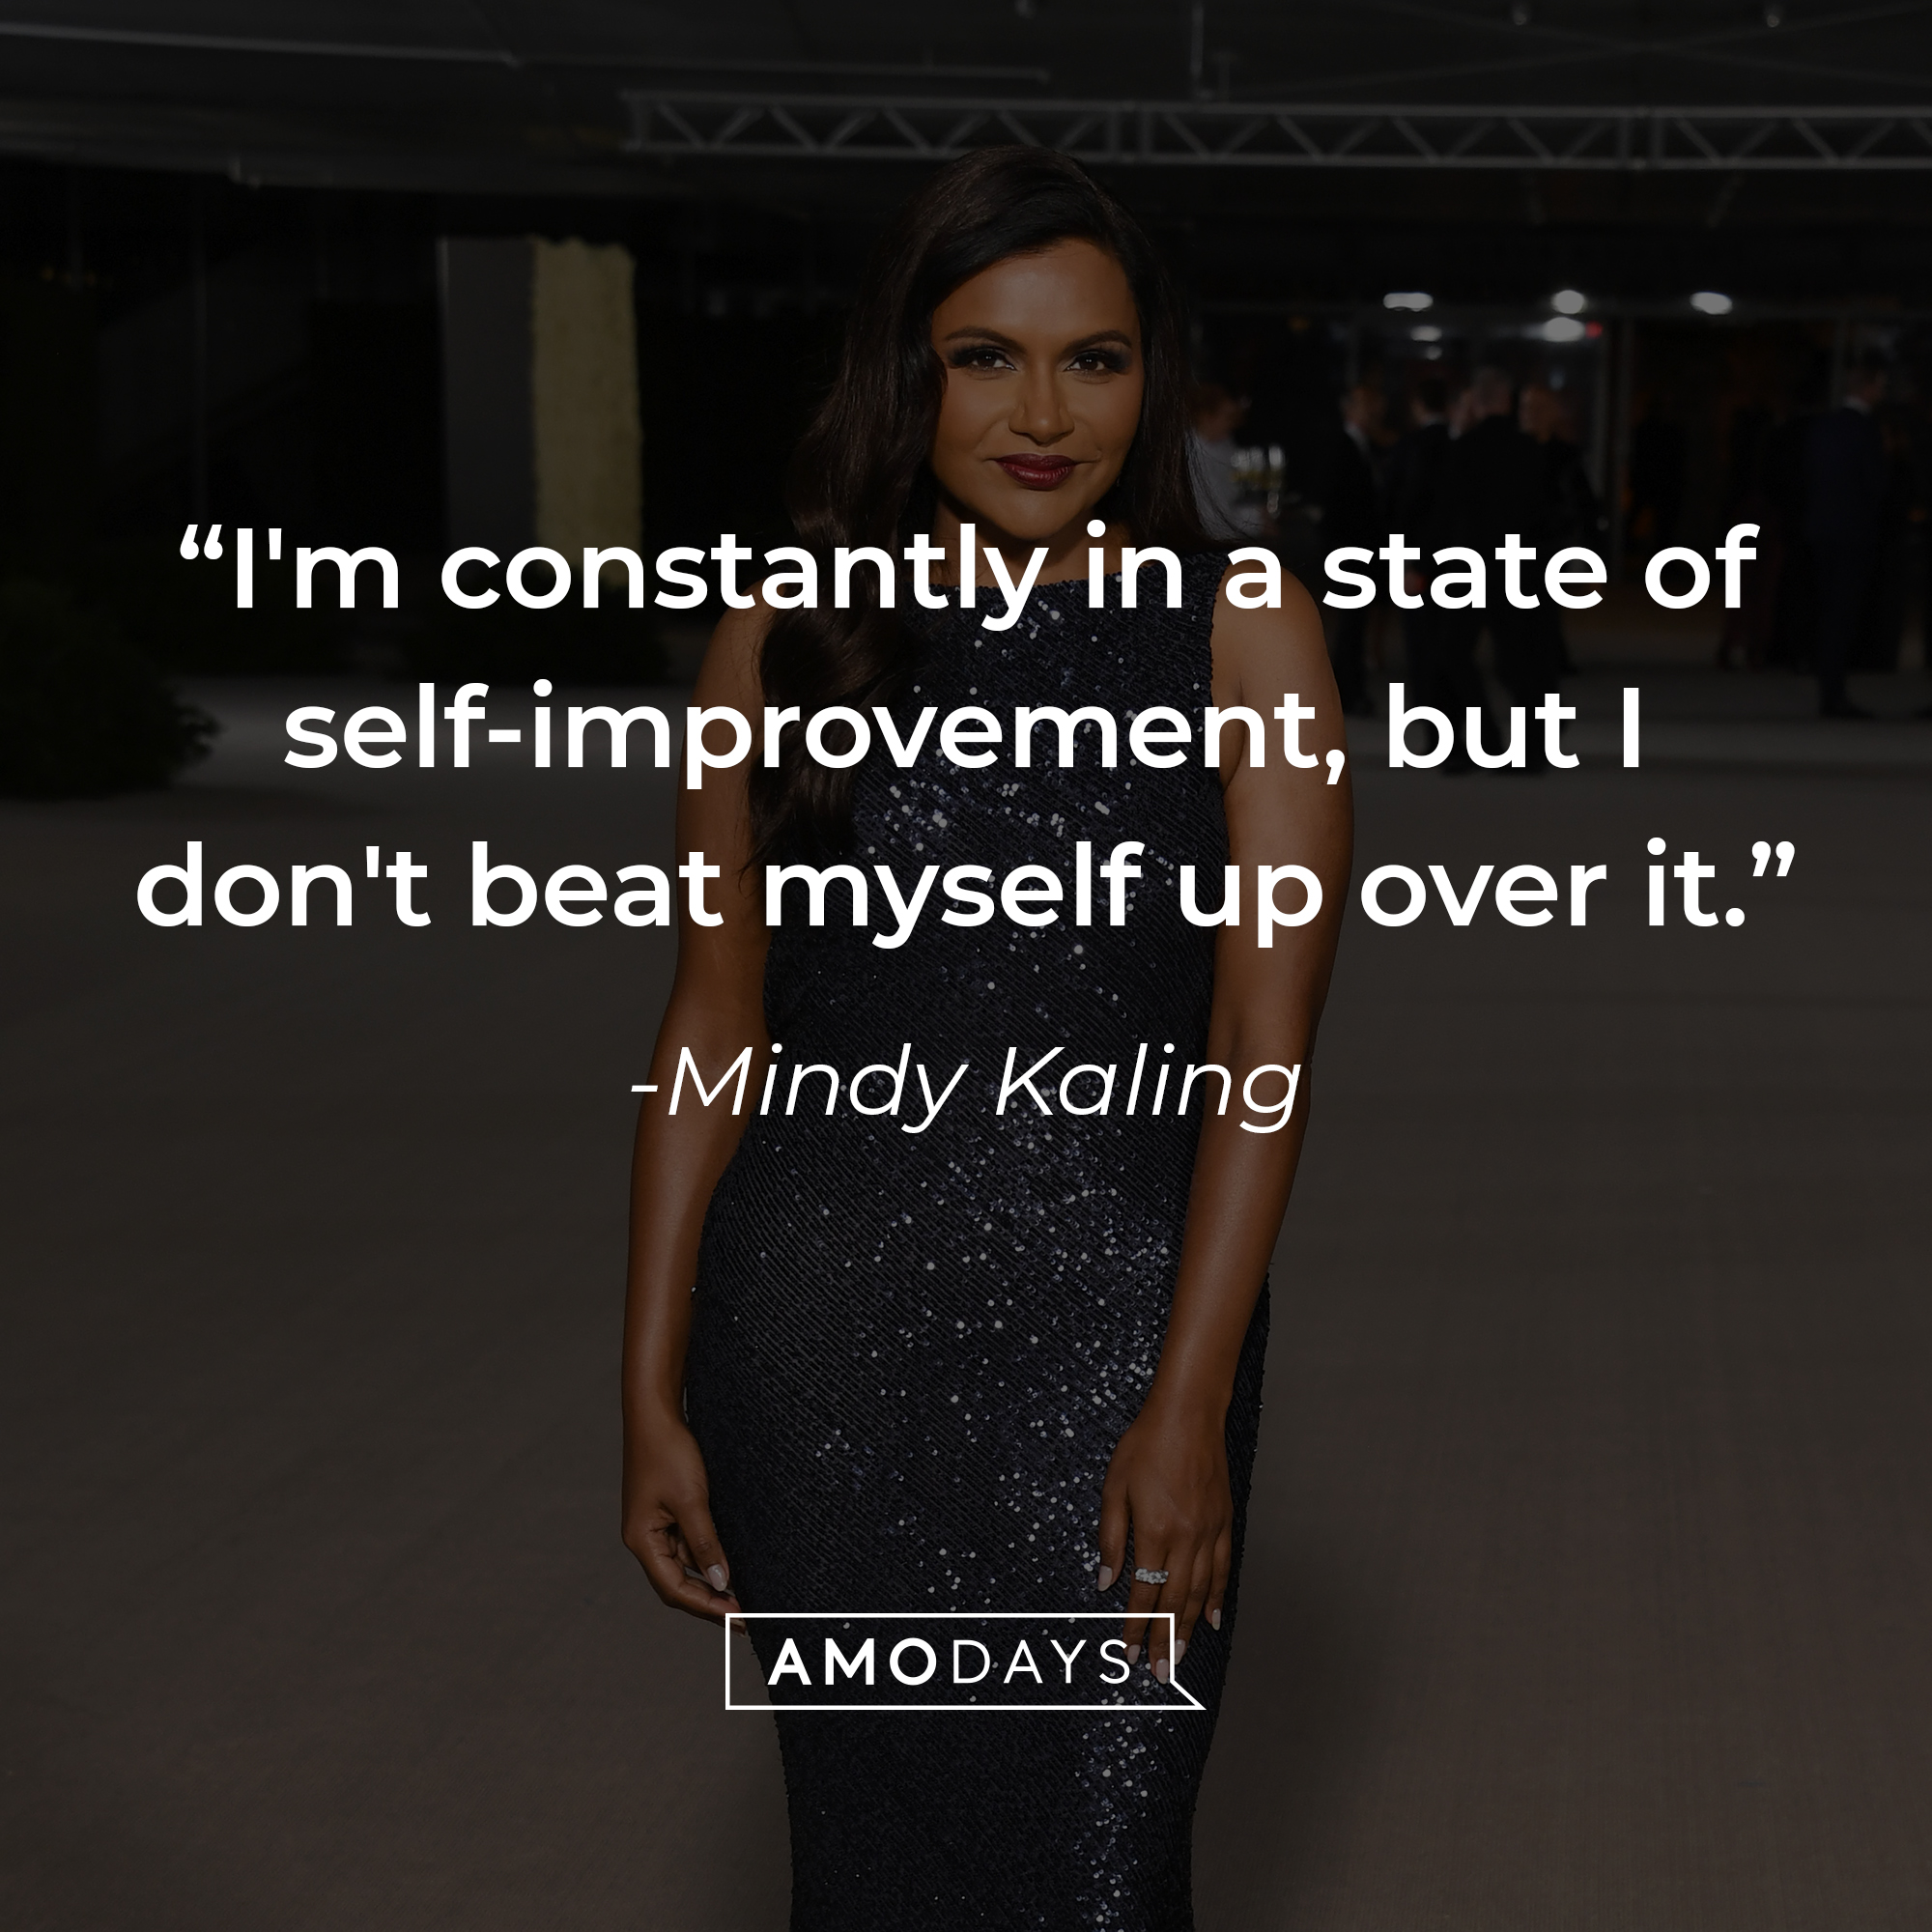 Mindy Kaling's quote: "I'm constantly in a state of self-improvement, but I don't beat myself up over it." | Source: Getty Images